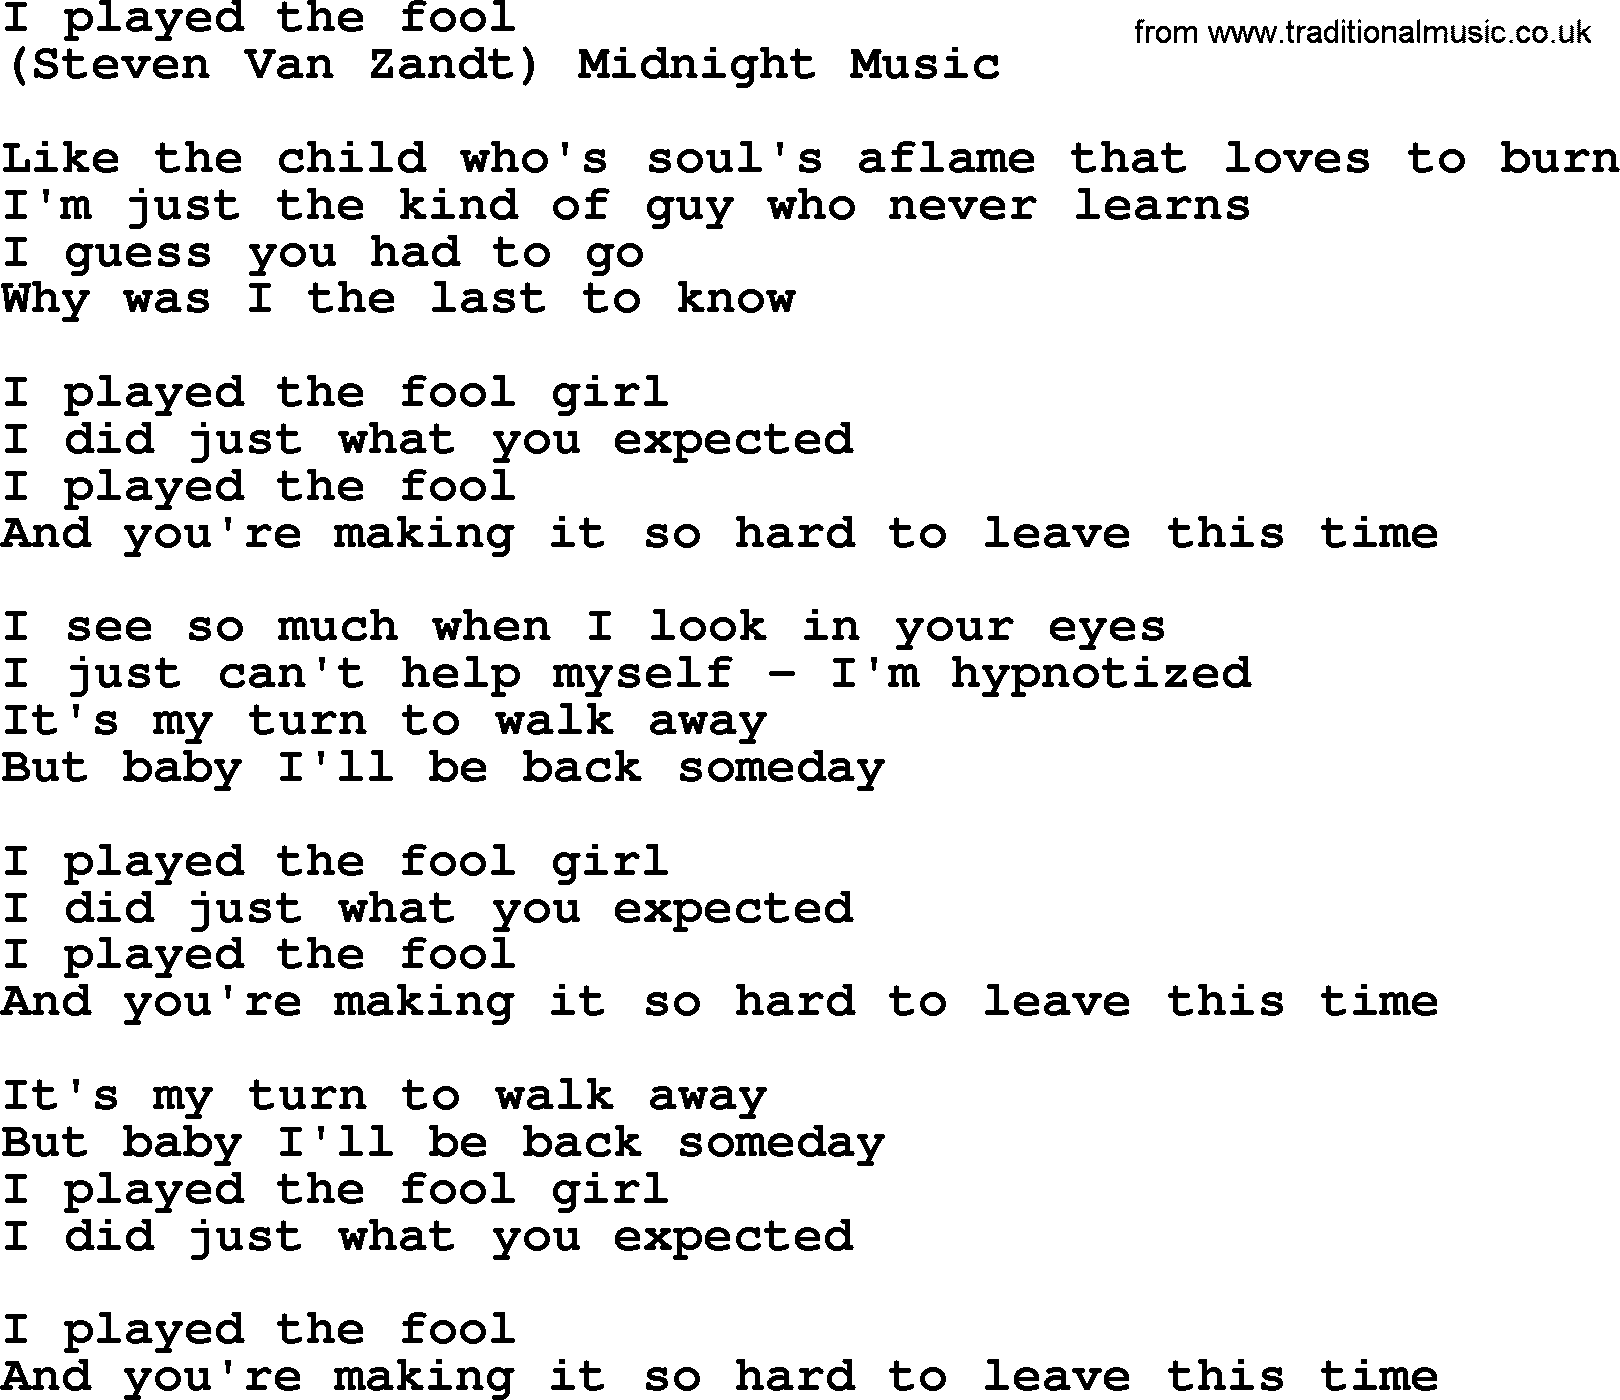 Bruce Springsteen song: I Played The Fool lyrics